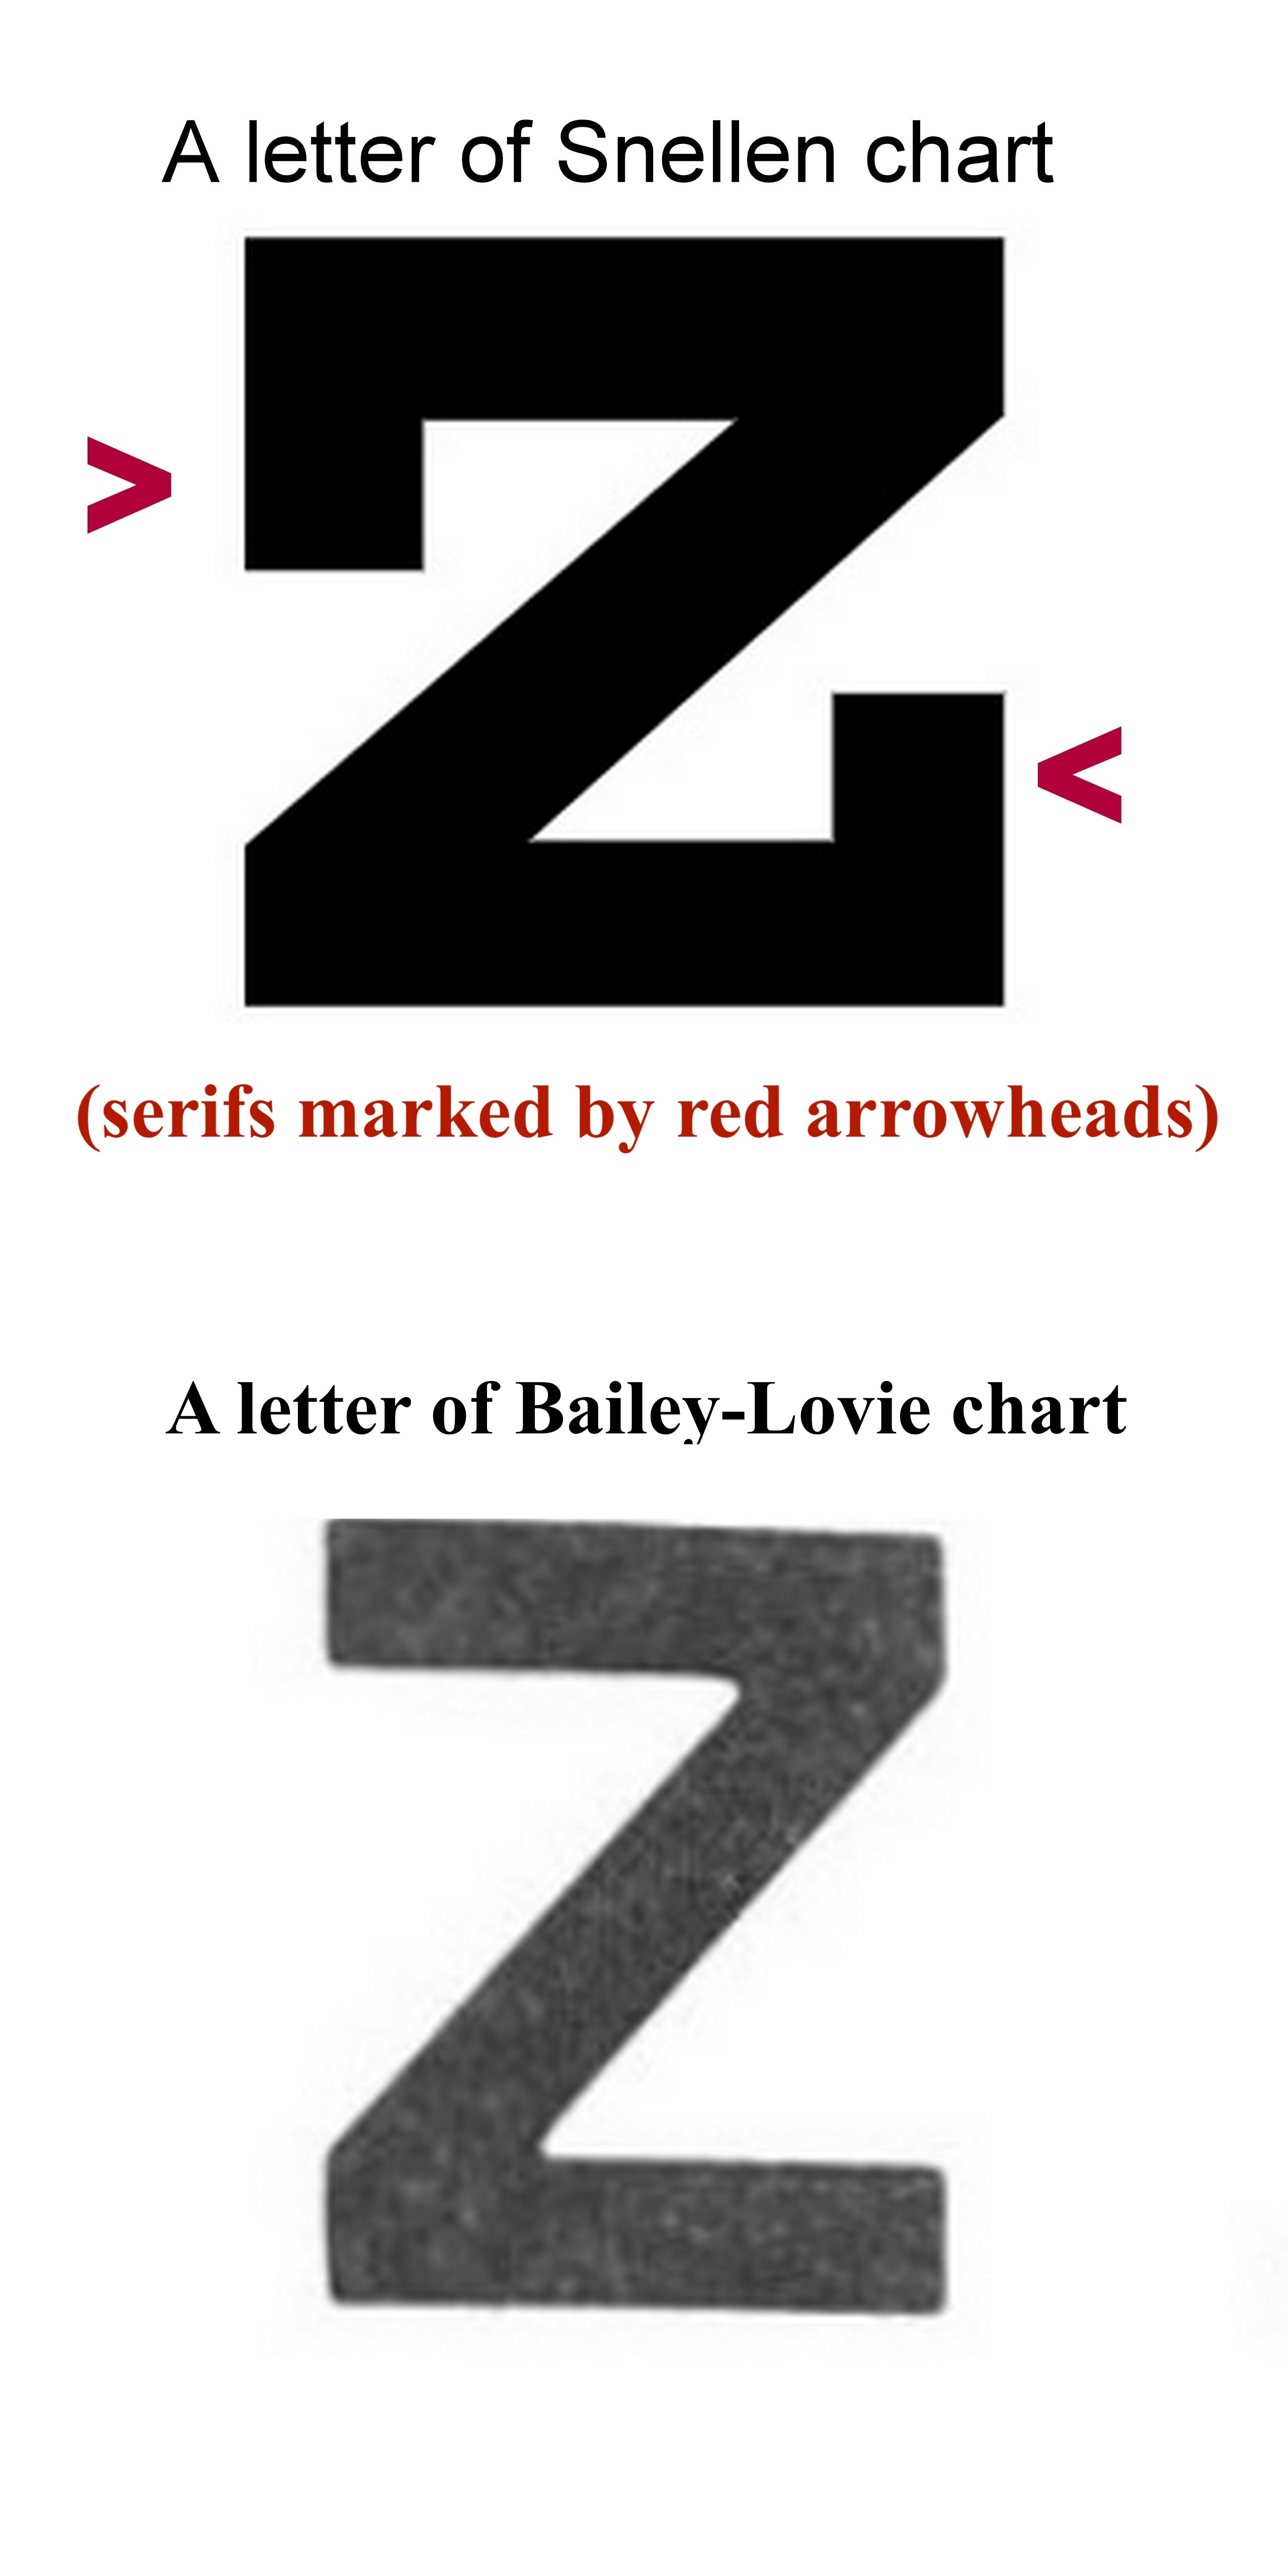 <p>Serifs in Snellen Chart. The image shows the difference between the Snellen chart and the Bailey-Lovie chart.</p>